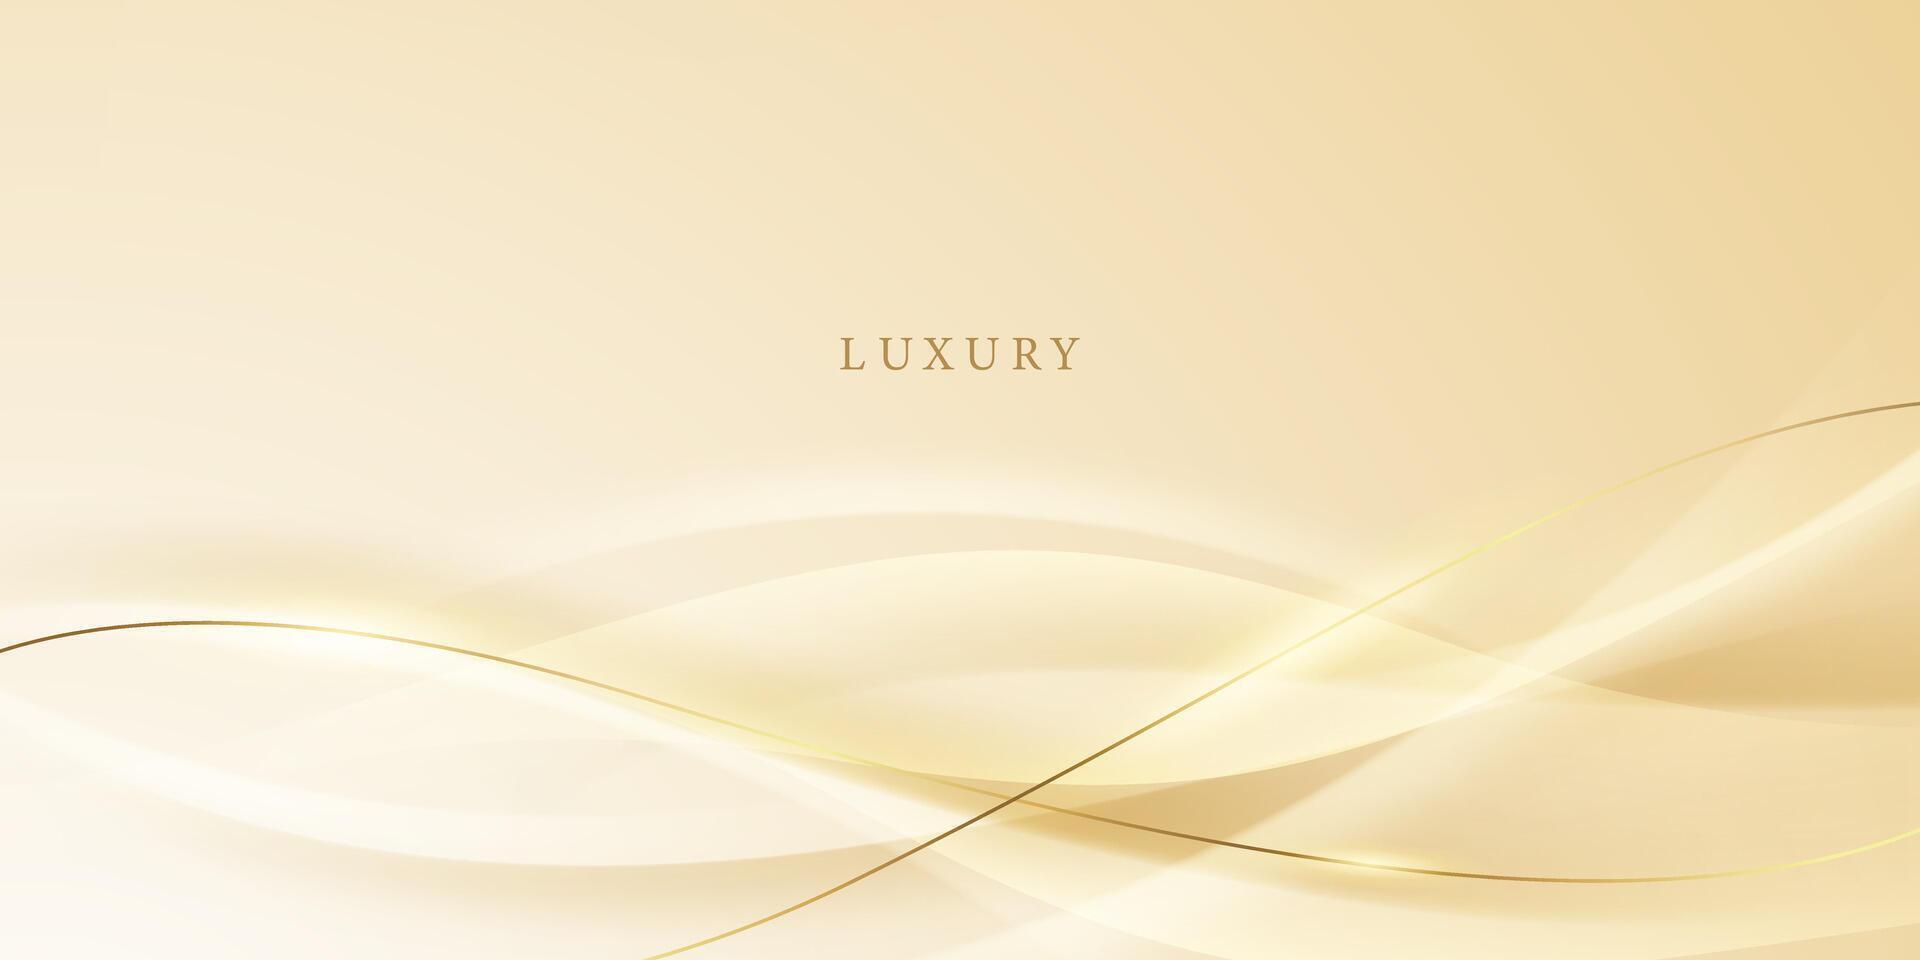 Luxury Golden Background With Luxurious Golden Elements Modern 3D Abstract Vector Illustration Design